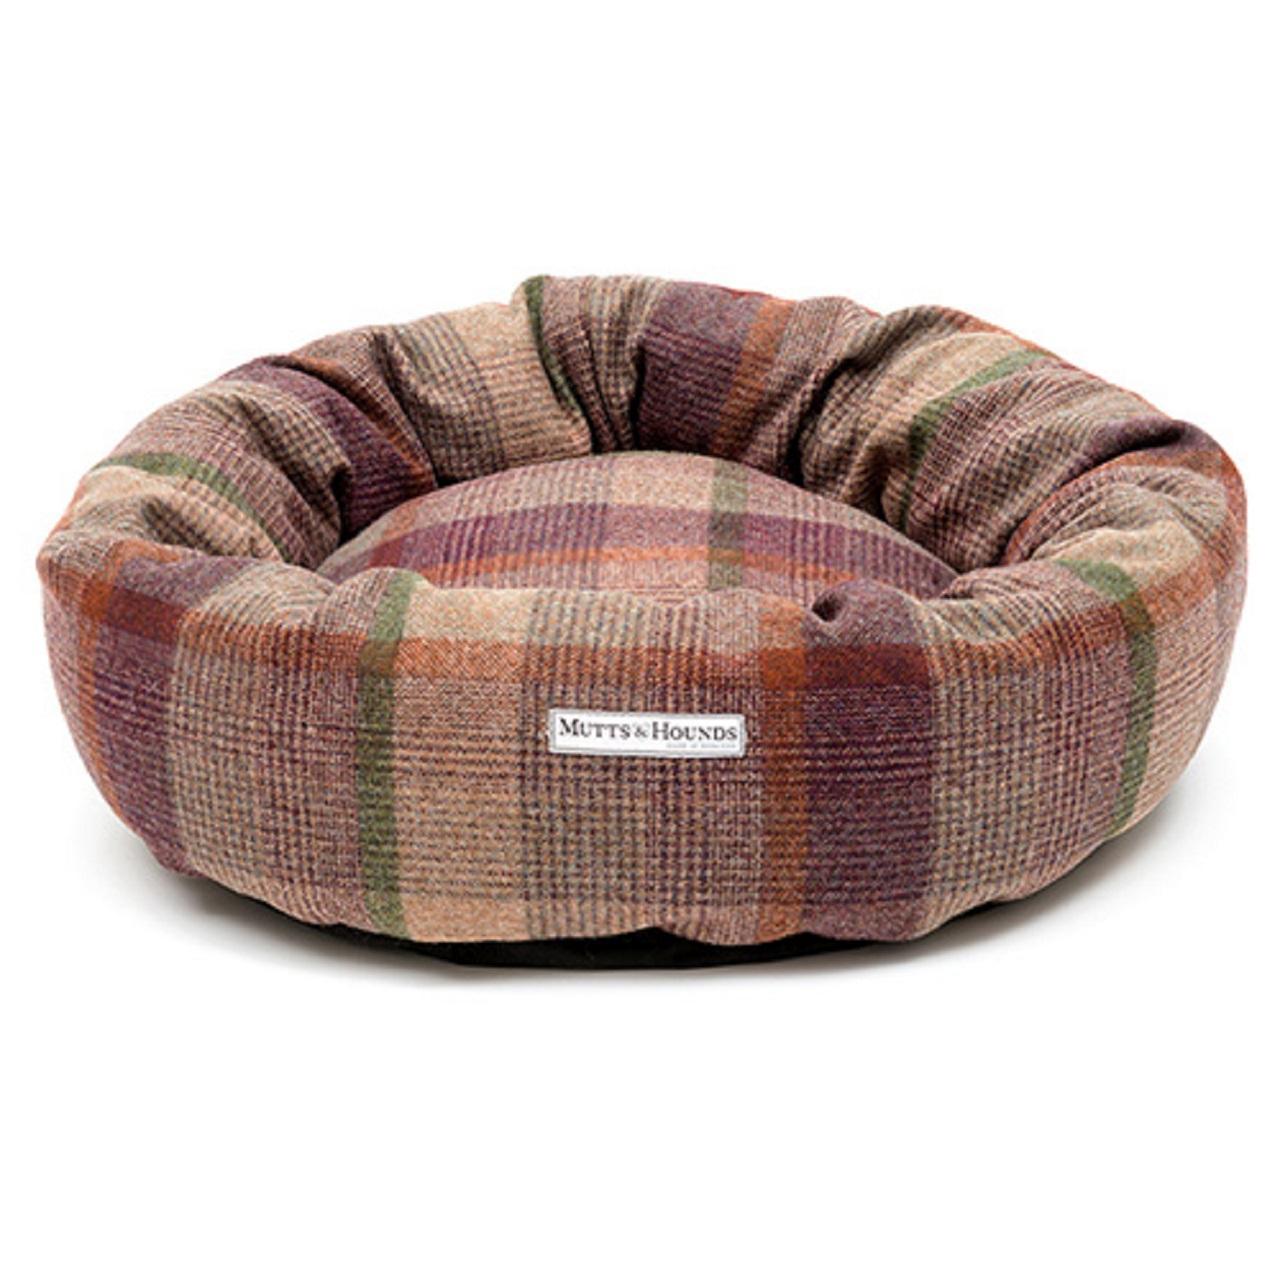 An image of Mutts & Hounds Grape Check Tweed Donut Bed Small